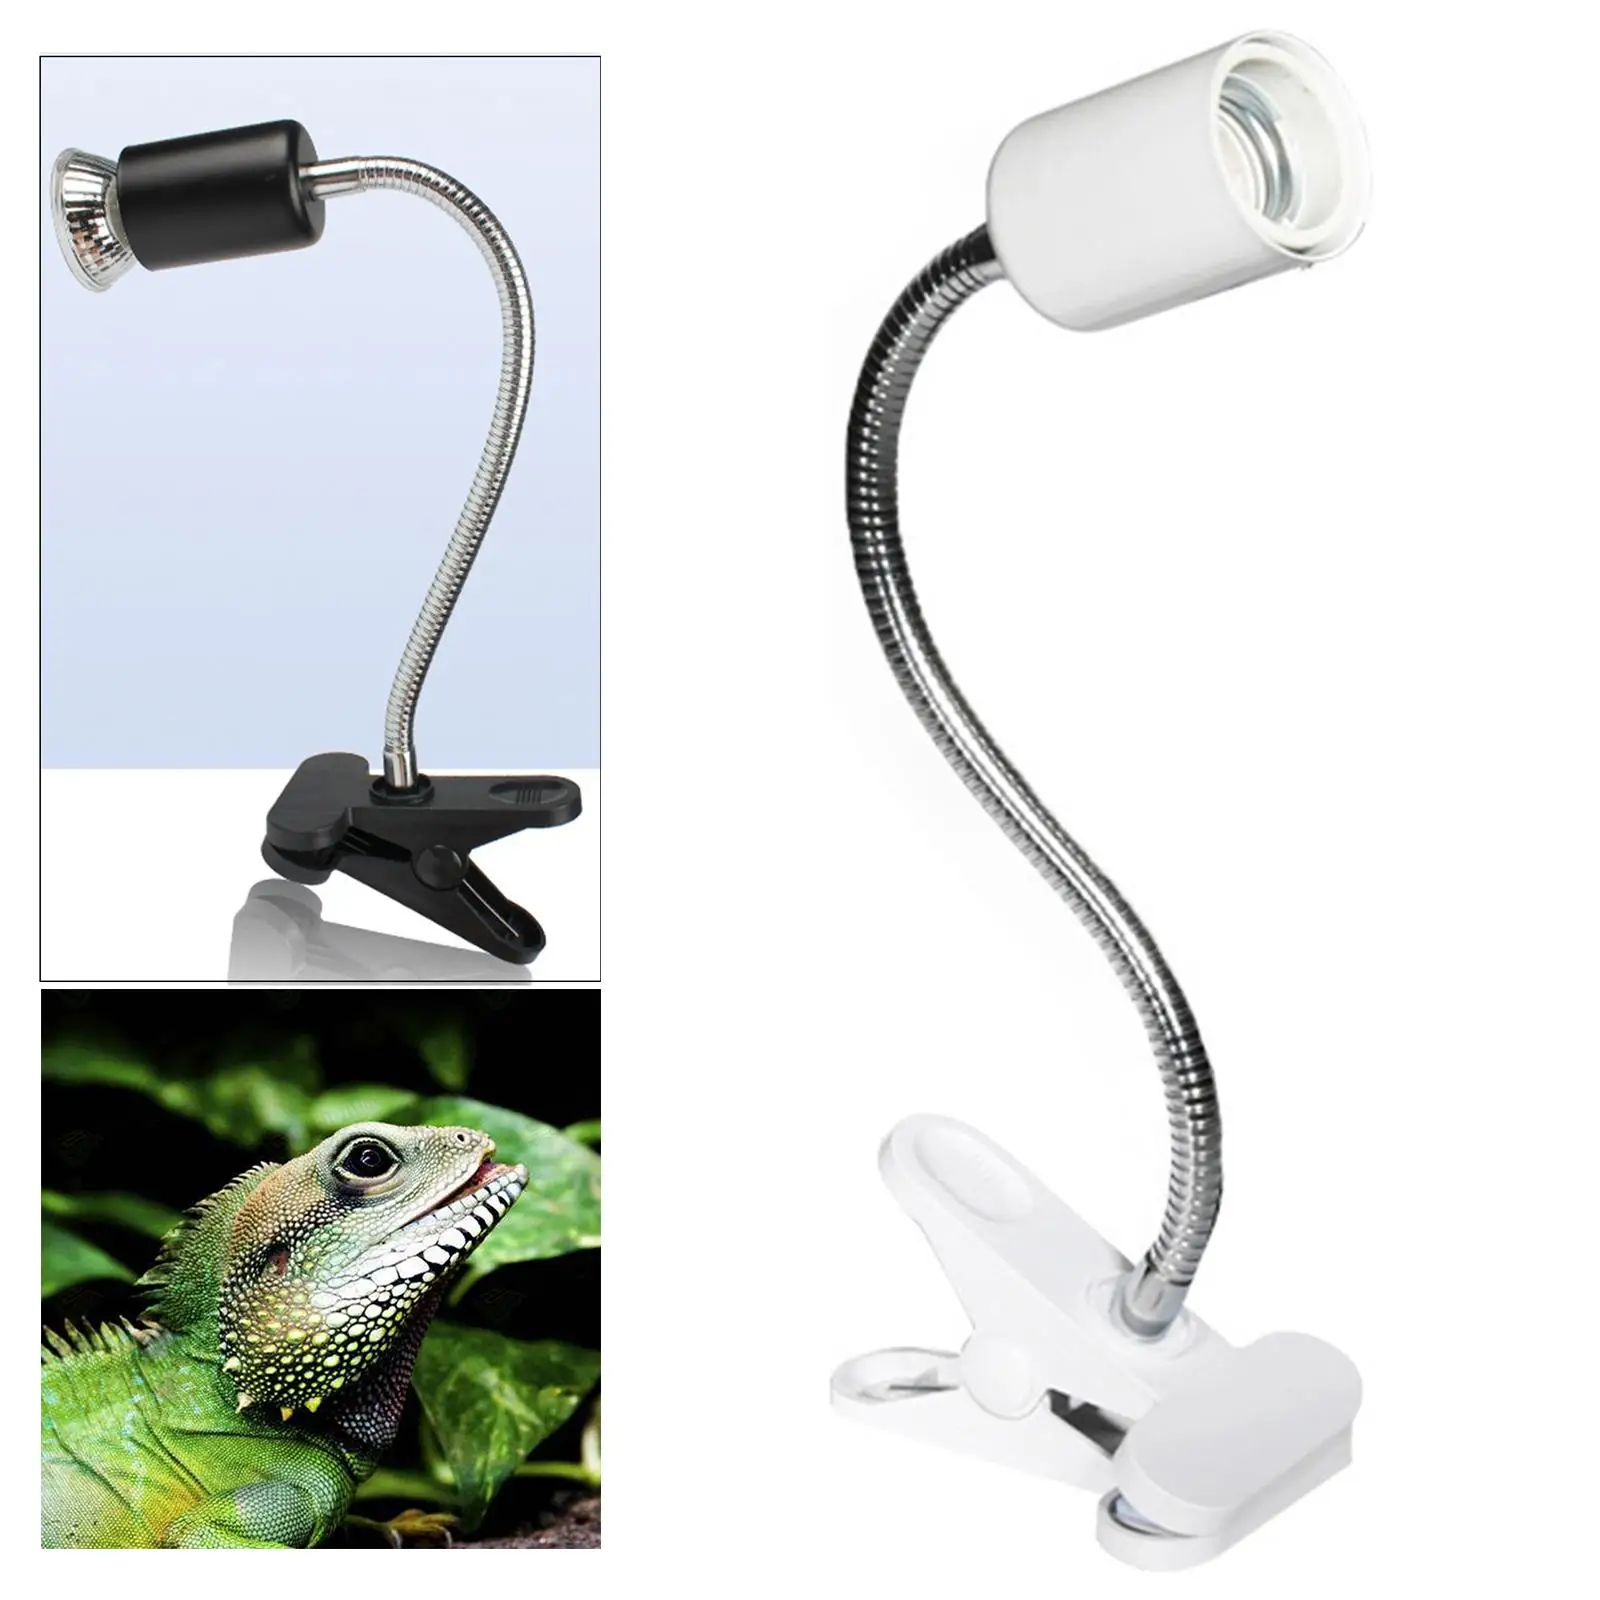 Reptile Heating Light Holder with Clamp UVA/Uvb Lights Flexible with Switch Kit for Amphibian & Aquarium Snakes Tortoise Lizard